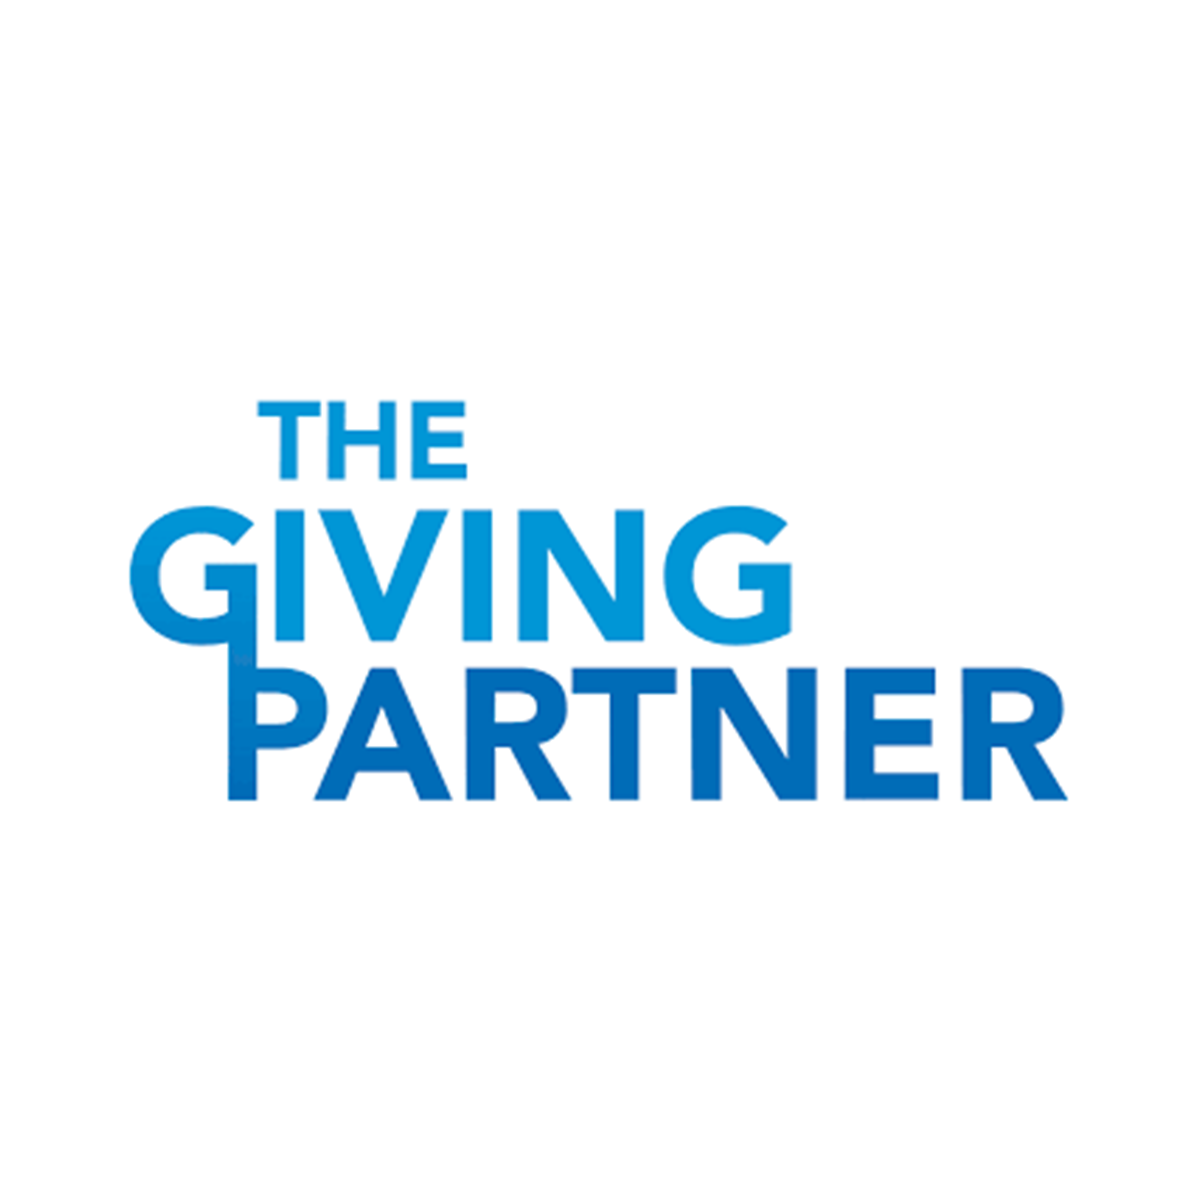 Giving Partner Graphic